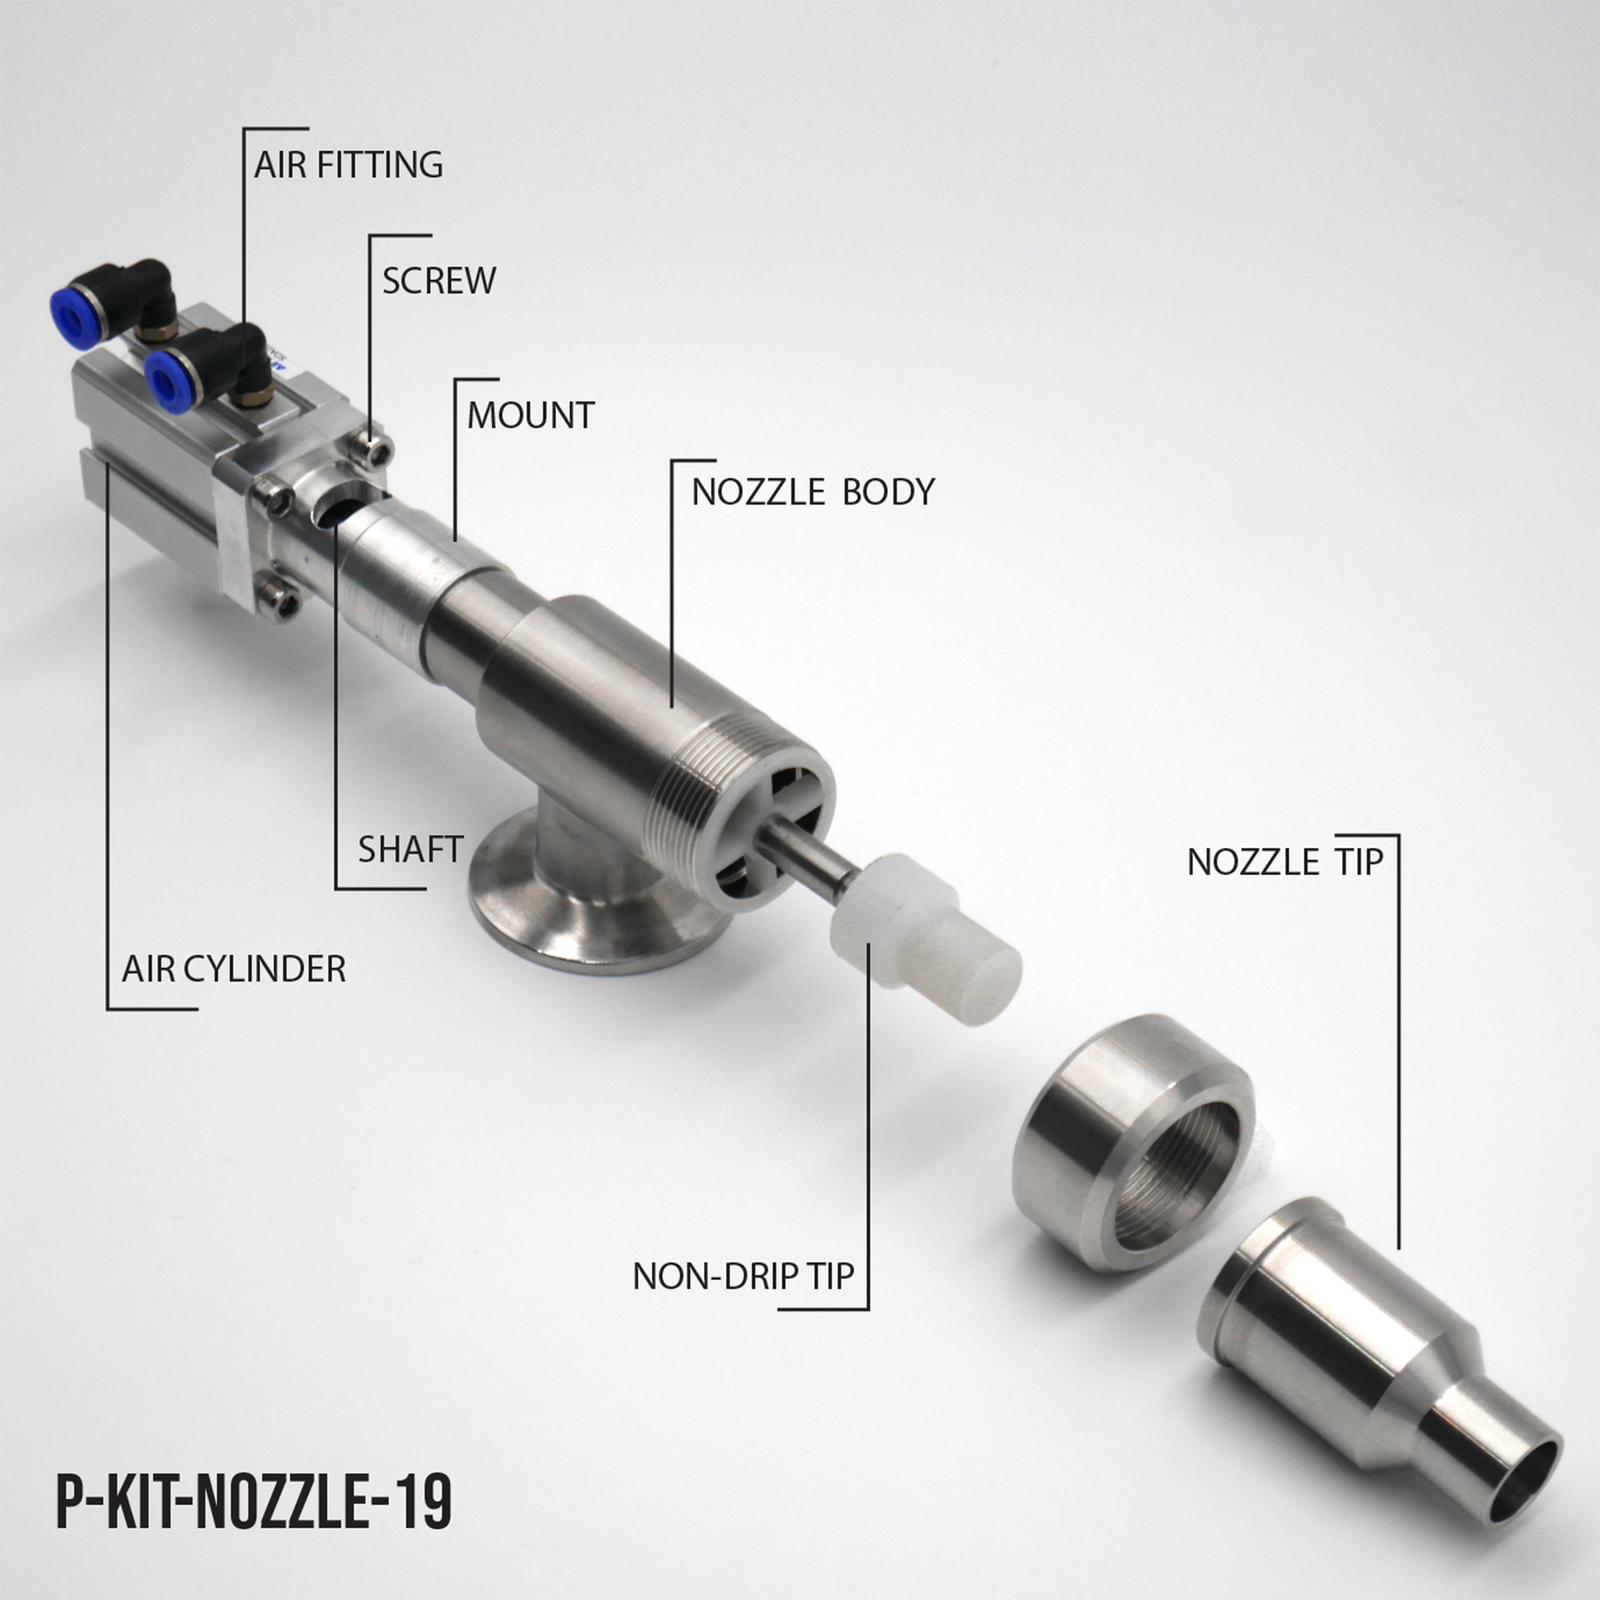 19mm Dispensing Nozzle Assembly BY JORES-TECHNOLOGIES